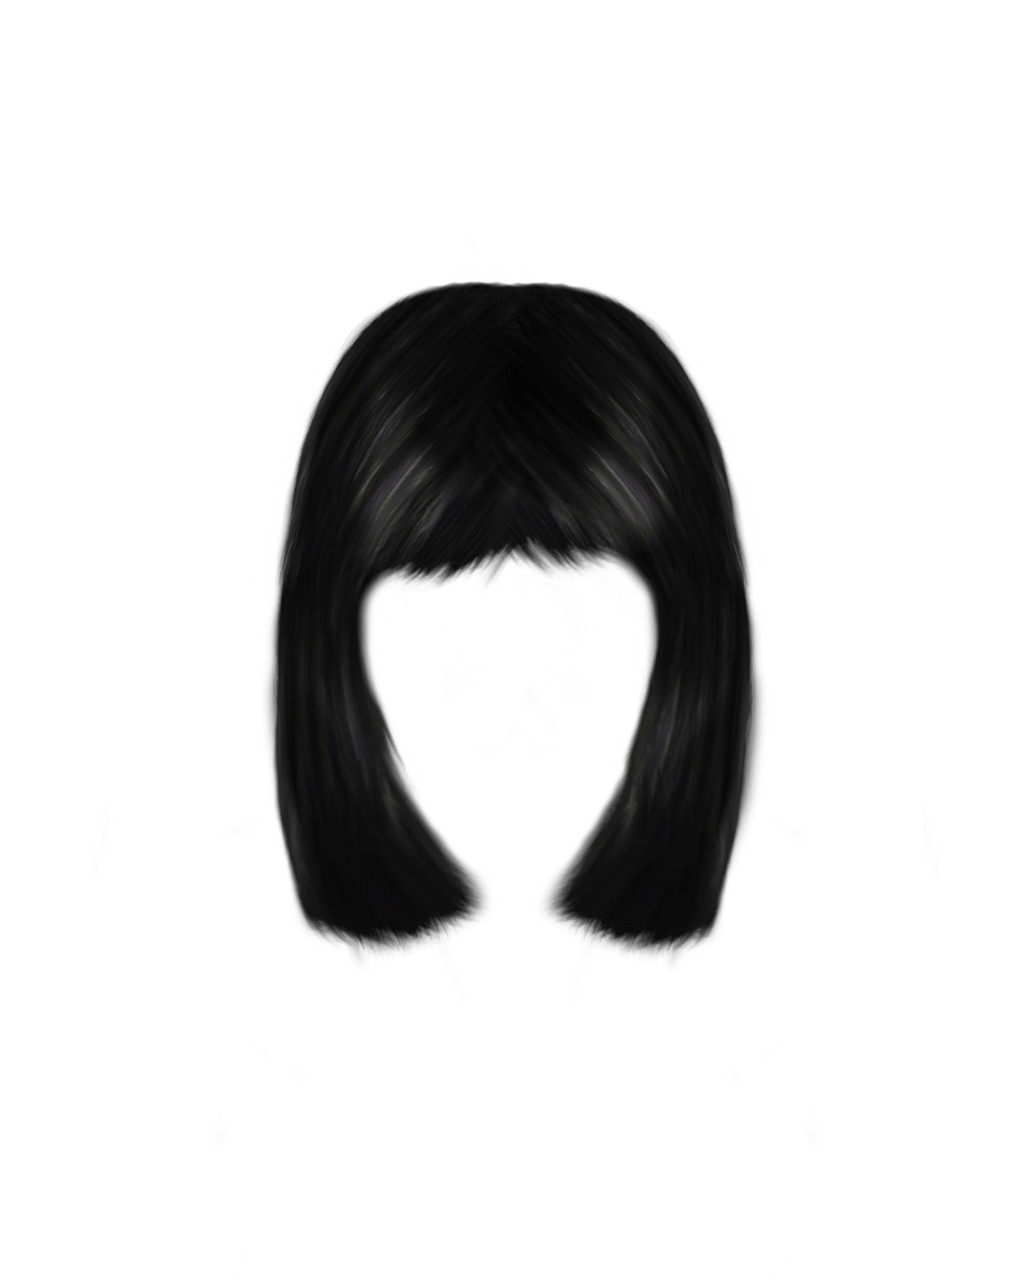 Hair wig PNG transparent image download, size: 1422x2048px